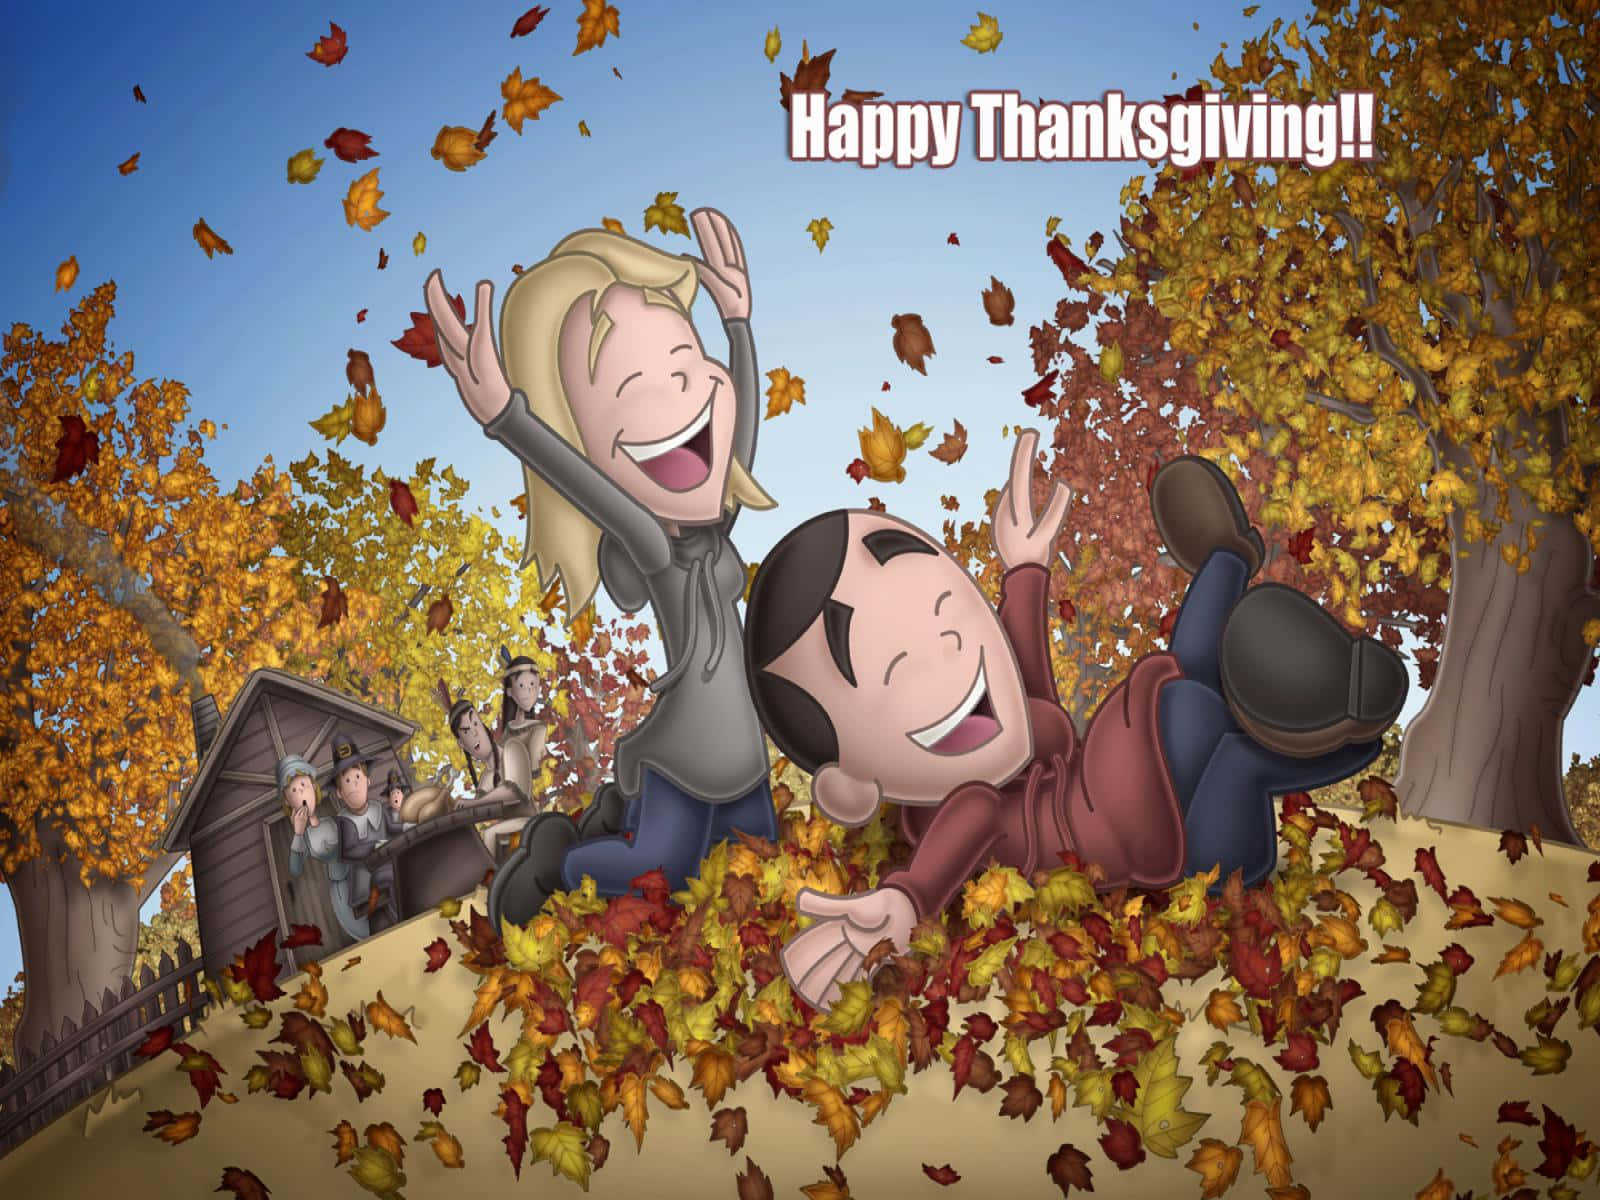 ' Give thanks for Thanksgiving and laugh out loud! Wallpaper